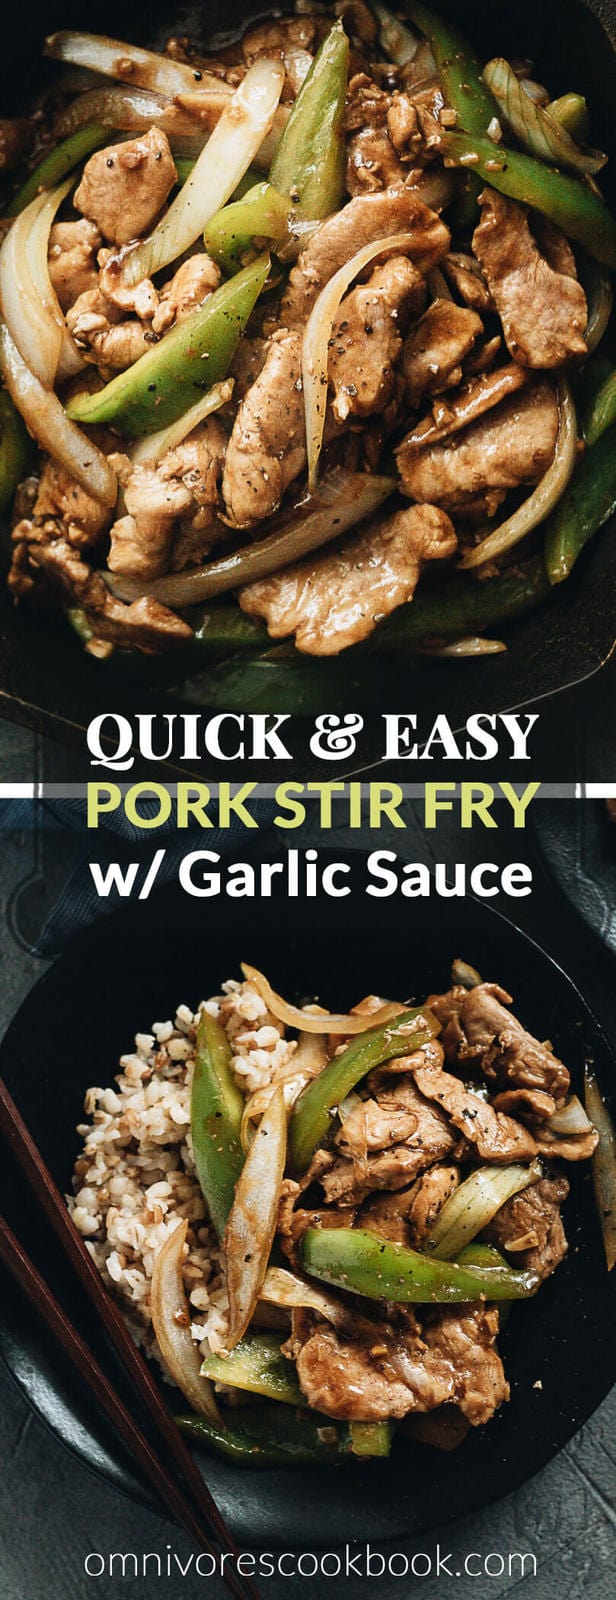 Tender juicy pork, stir fried with crispy peppers and onions in a garlicky savory sauce. Not only is it so easy and fast to make, but it also makes a great weekday main dish with affordable ingredients and is loaded with nutrition. #pork #pepper #stirfry #recipes #dinner